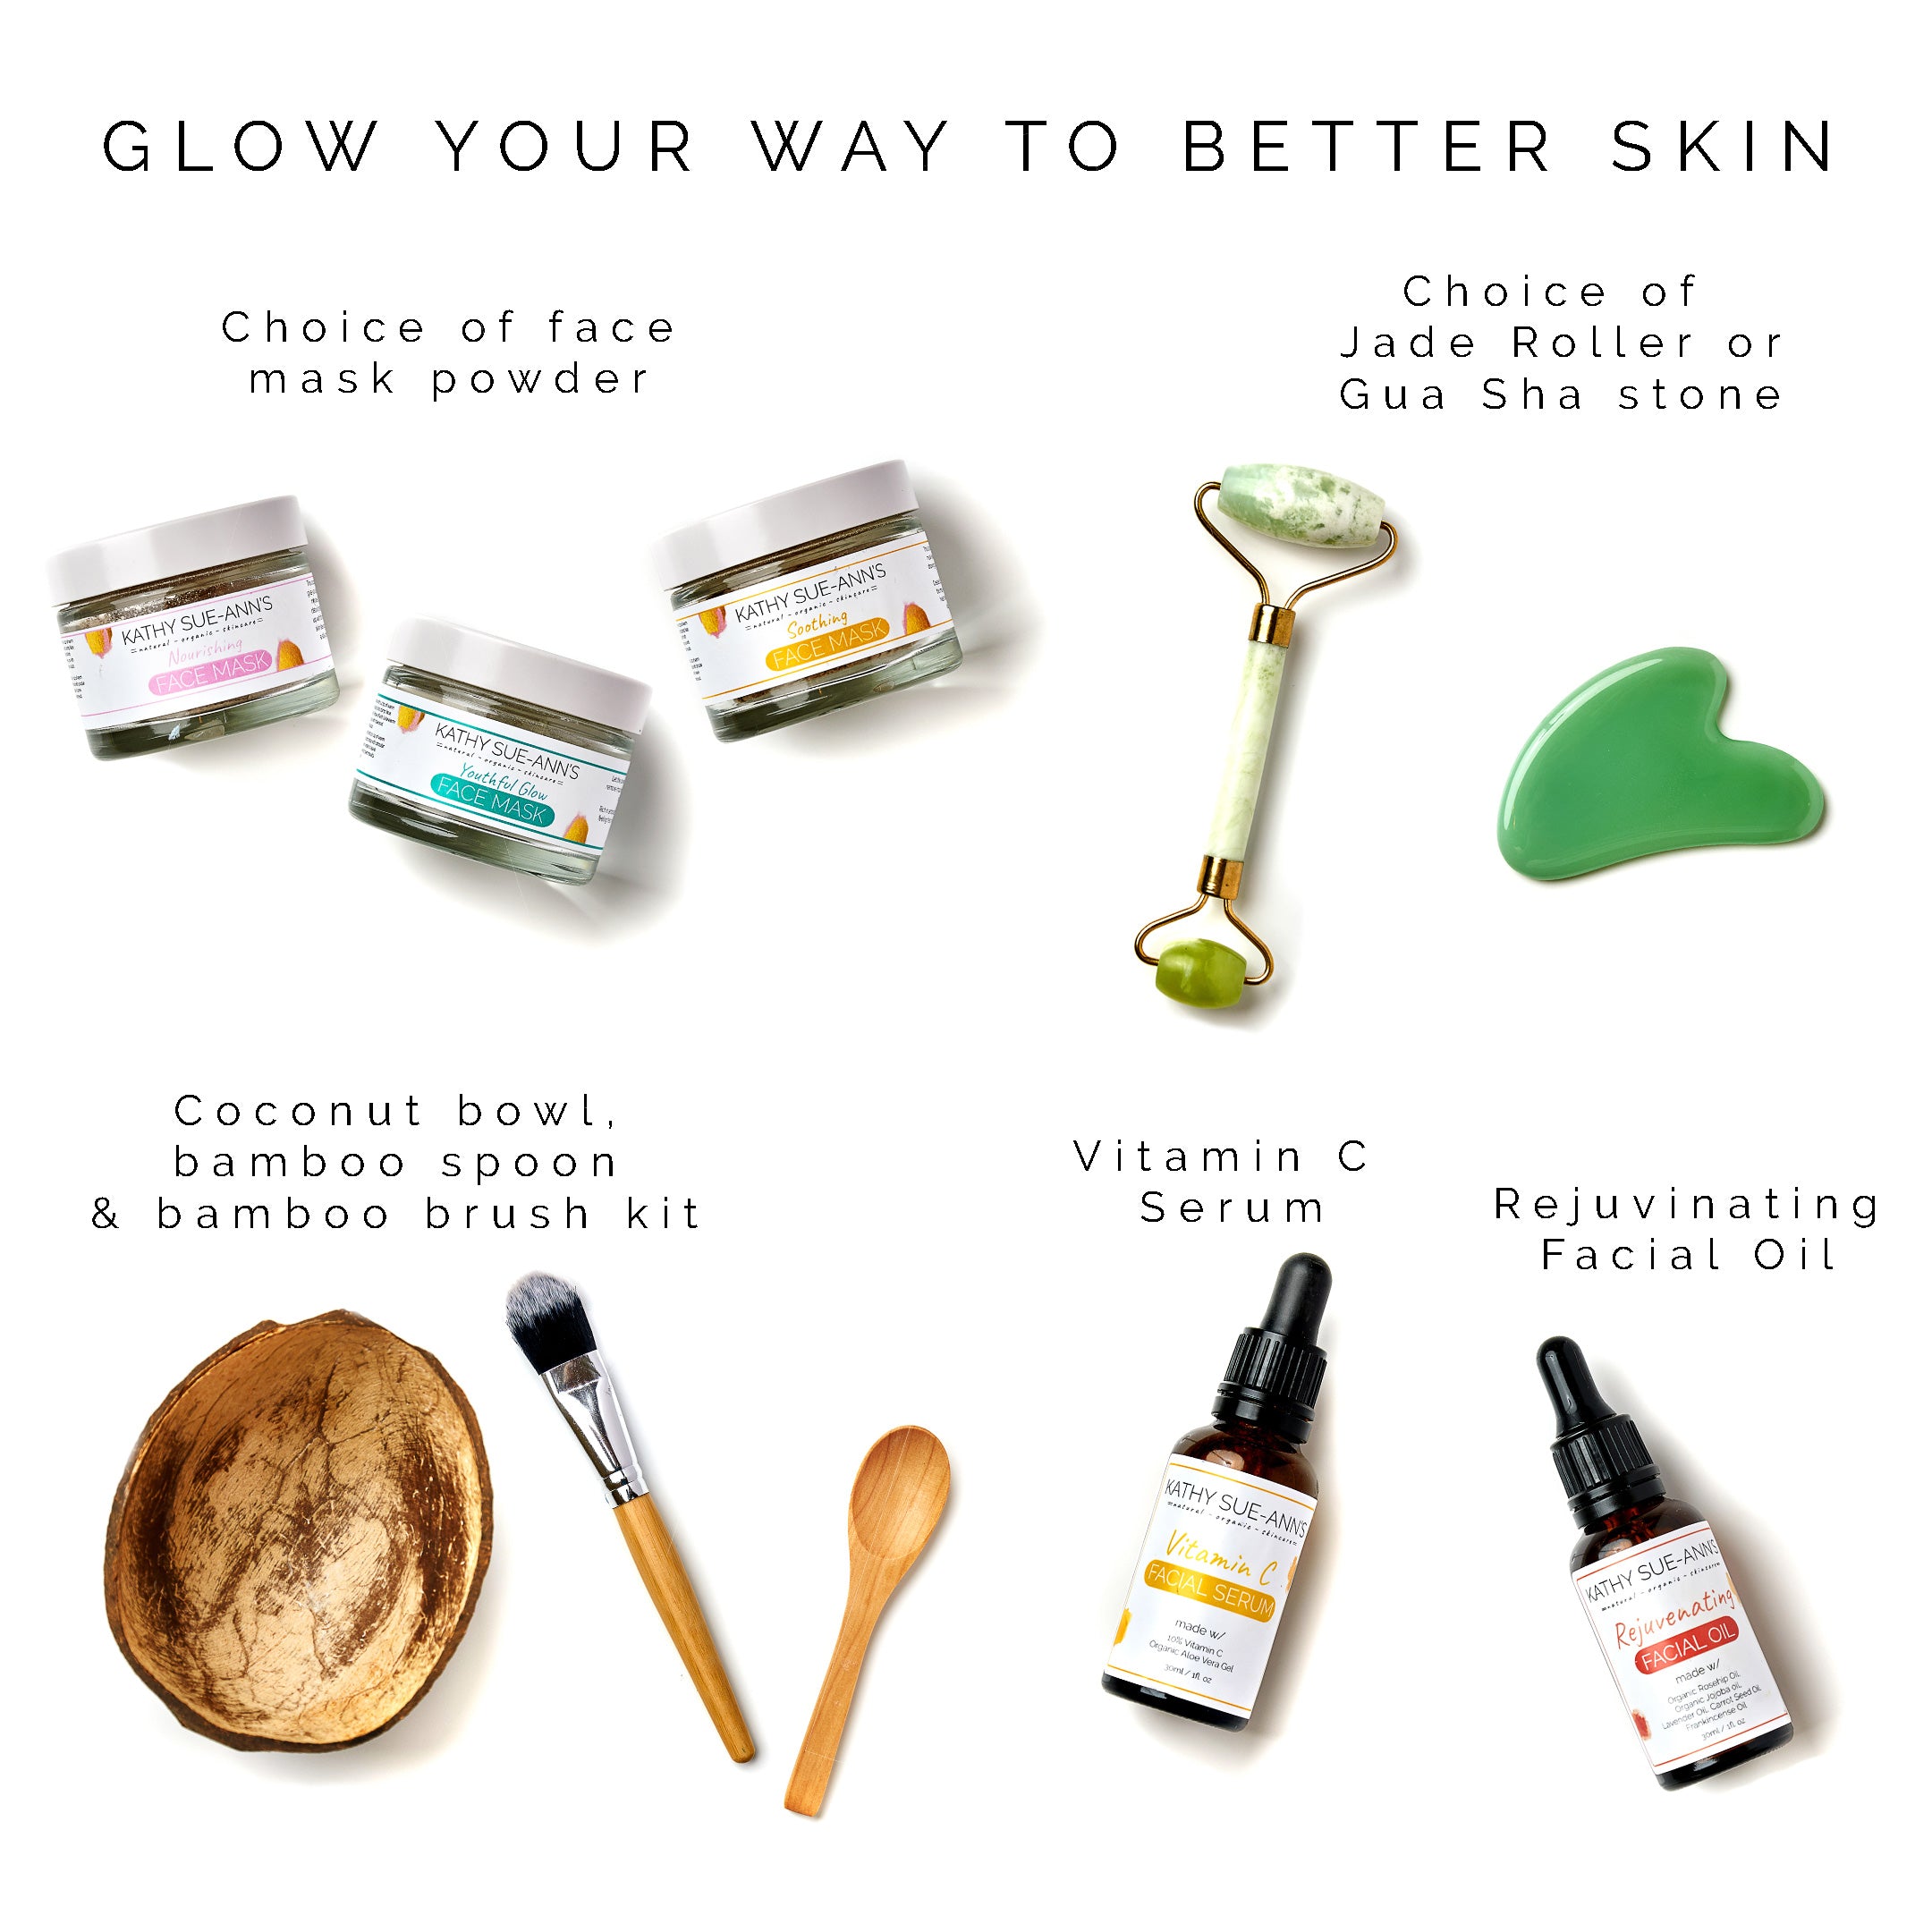 Glow Your Way to Better Skin